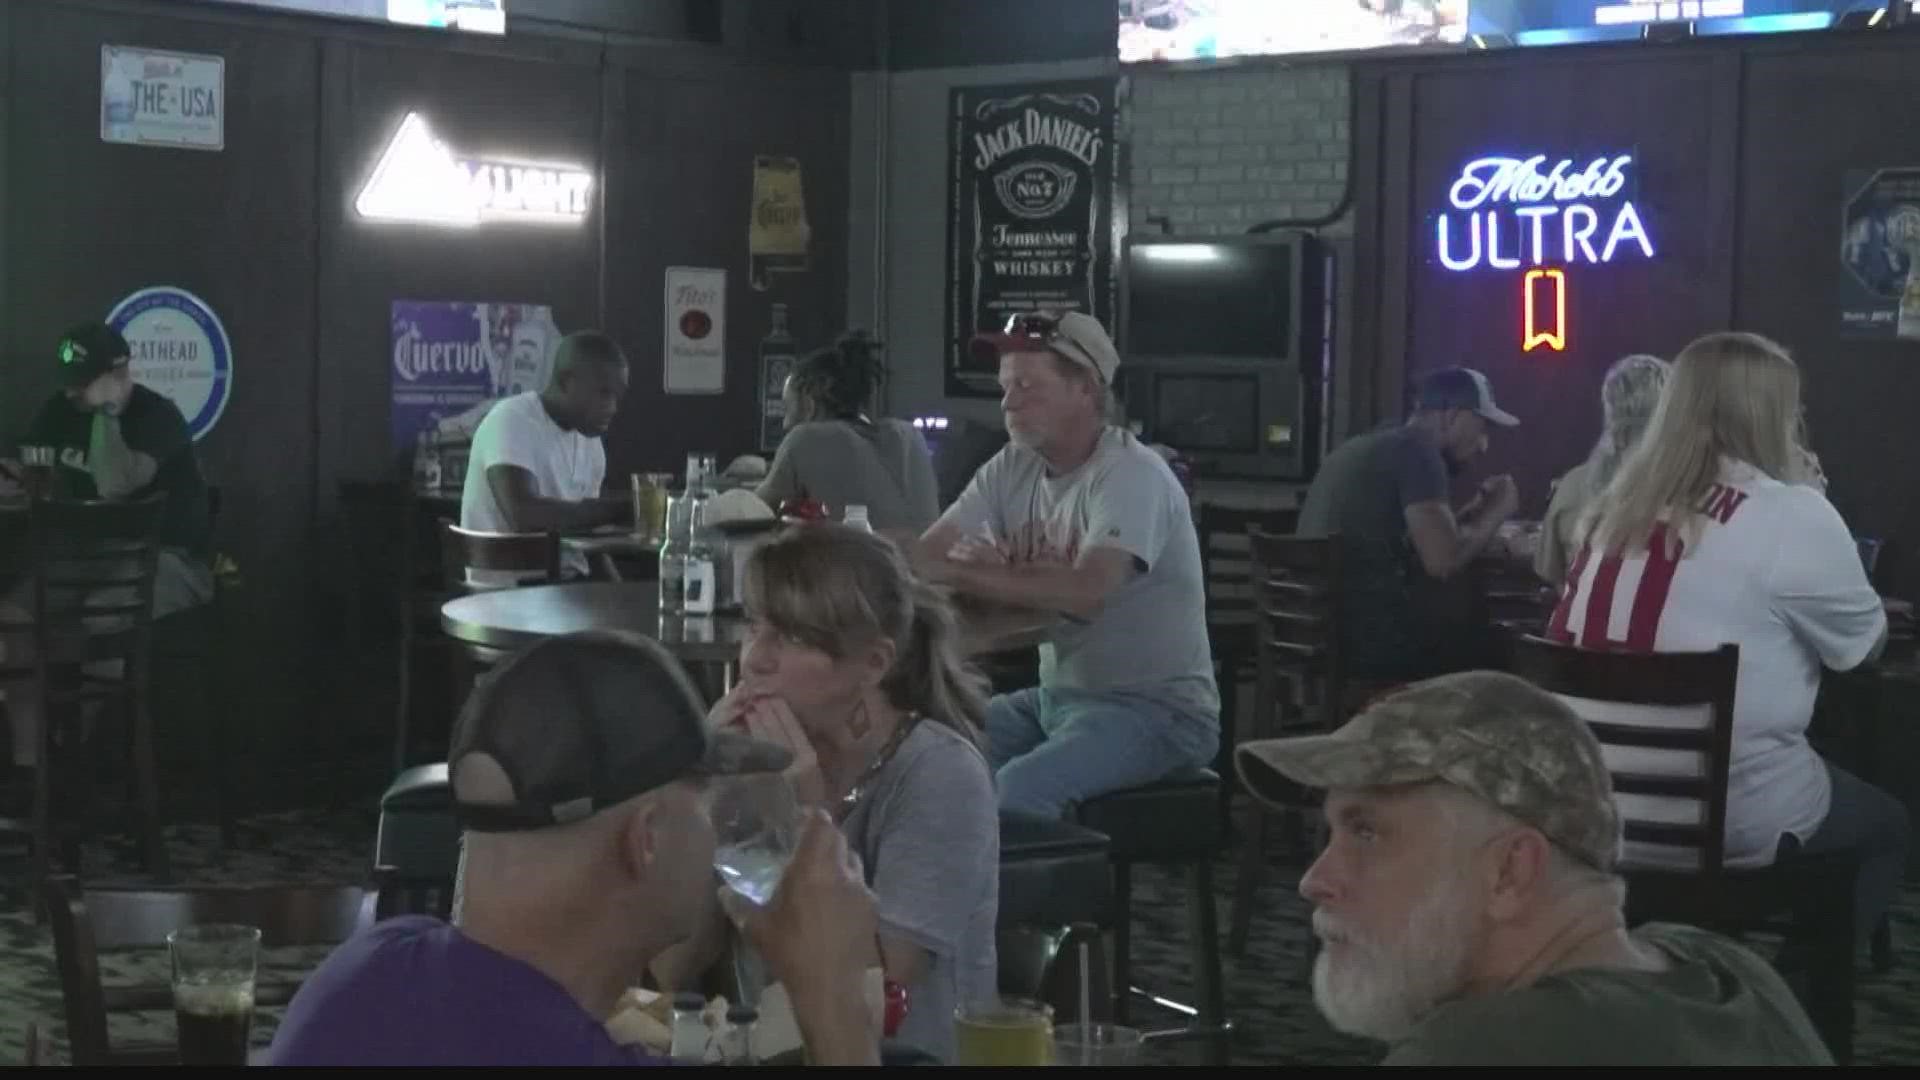 The End Zone sports bar has been preparing for football season since earlier this summer.